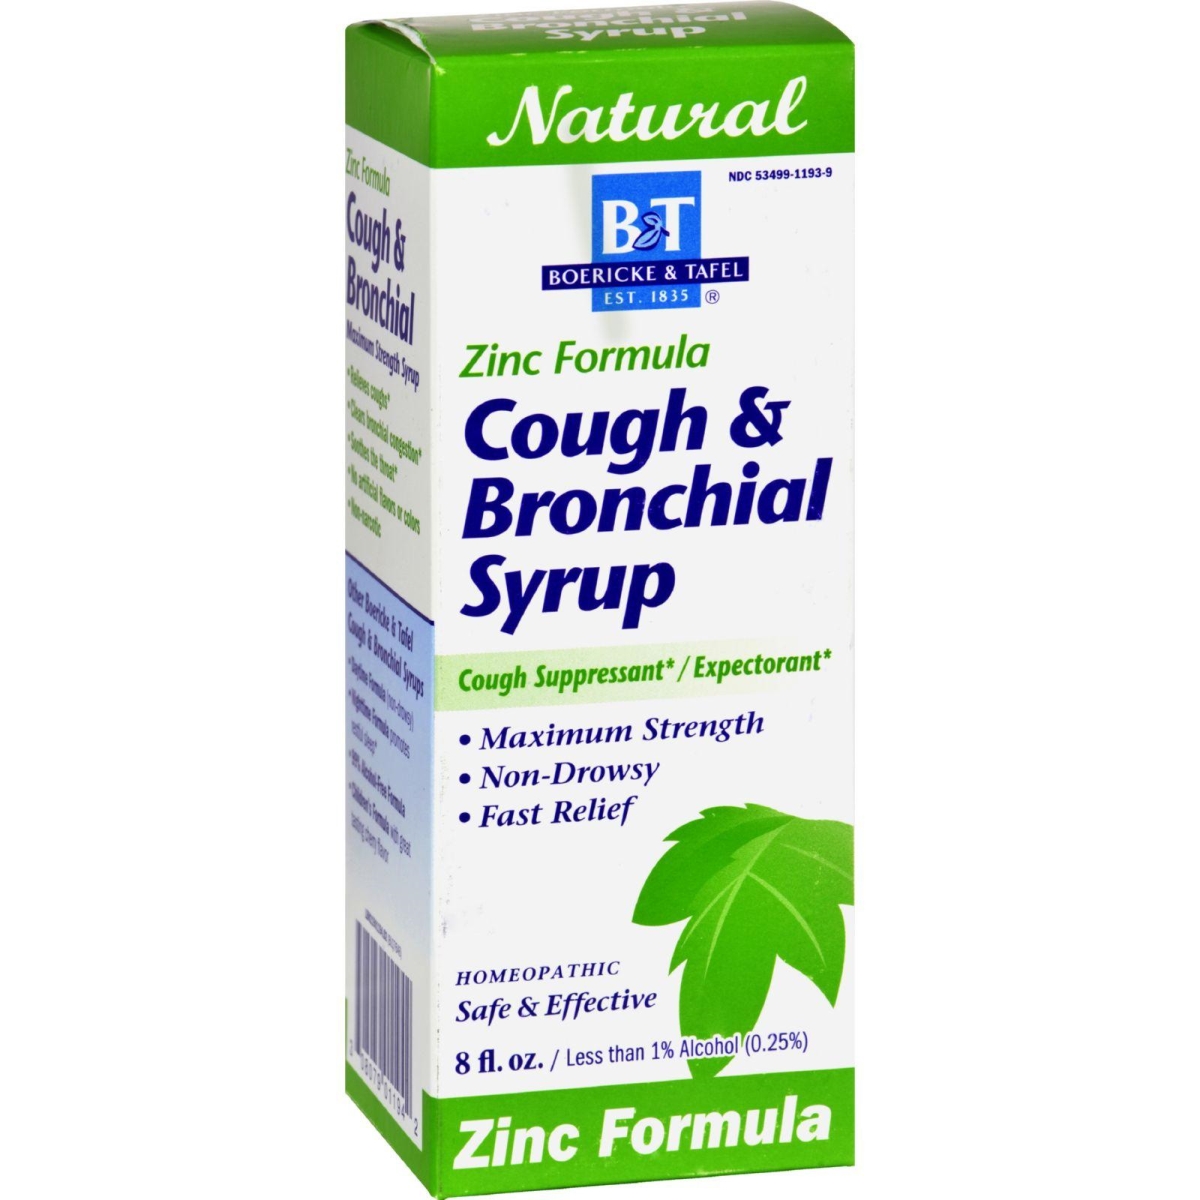 Boericke And Tafel Hg0648949 8 Fl Oz Cough & Bronchial Syrup With Zinc